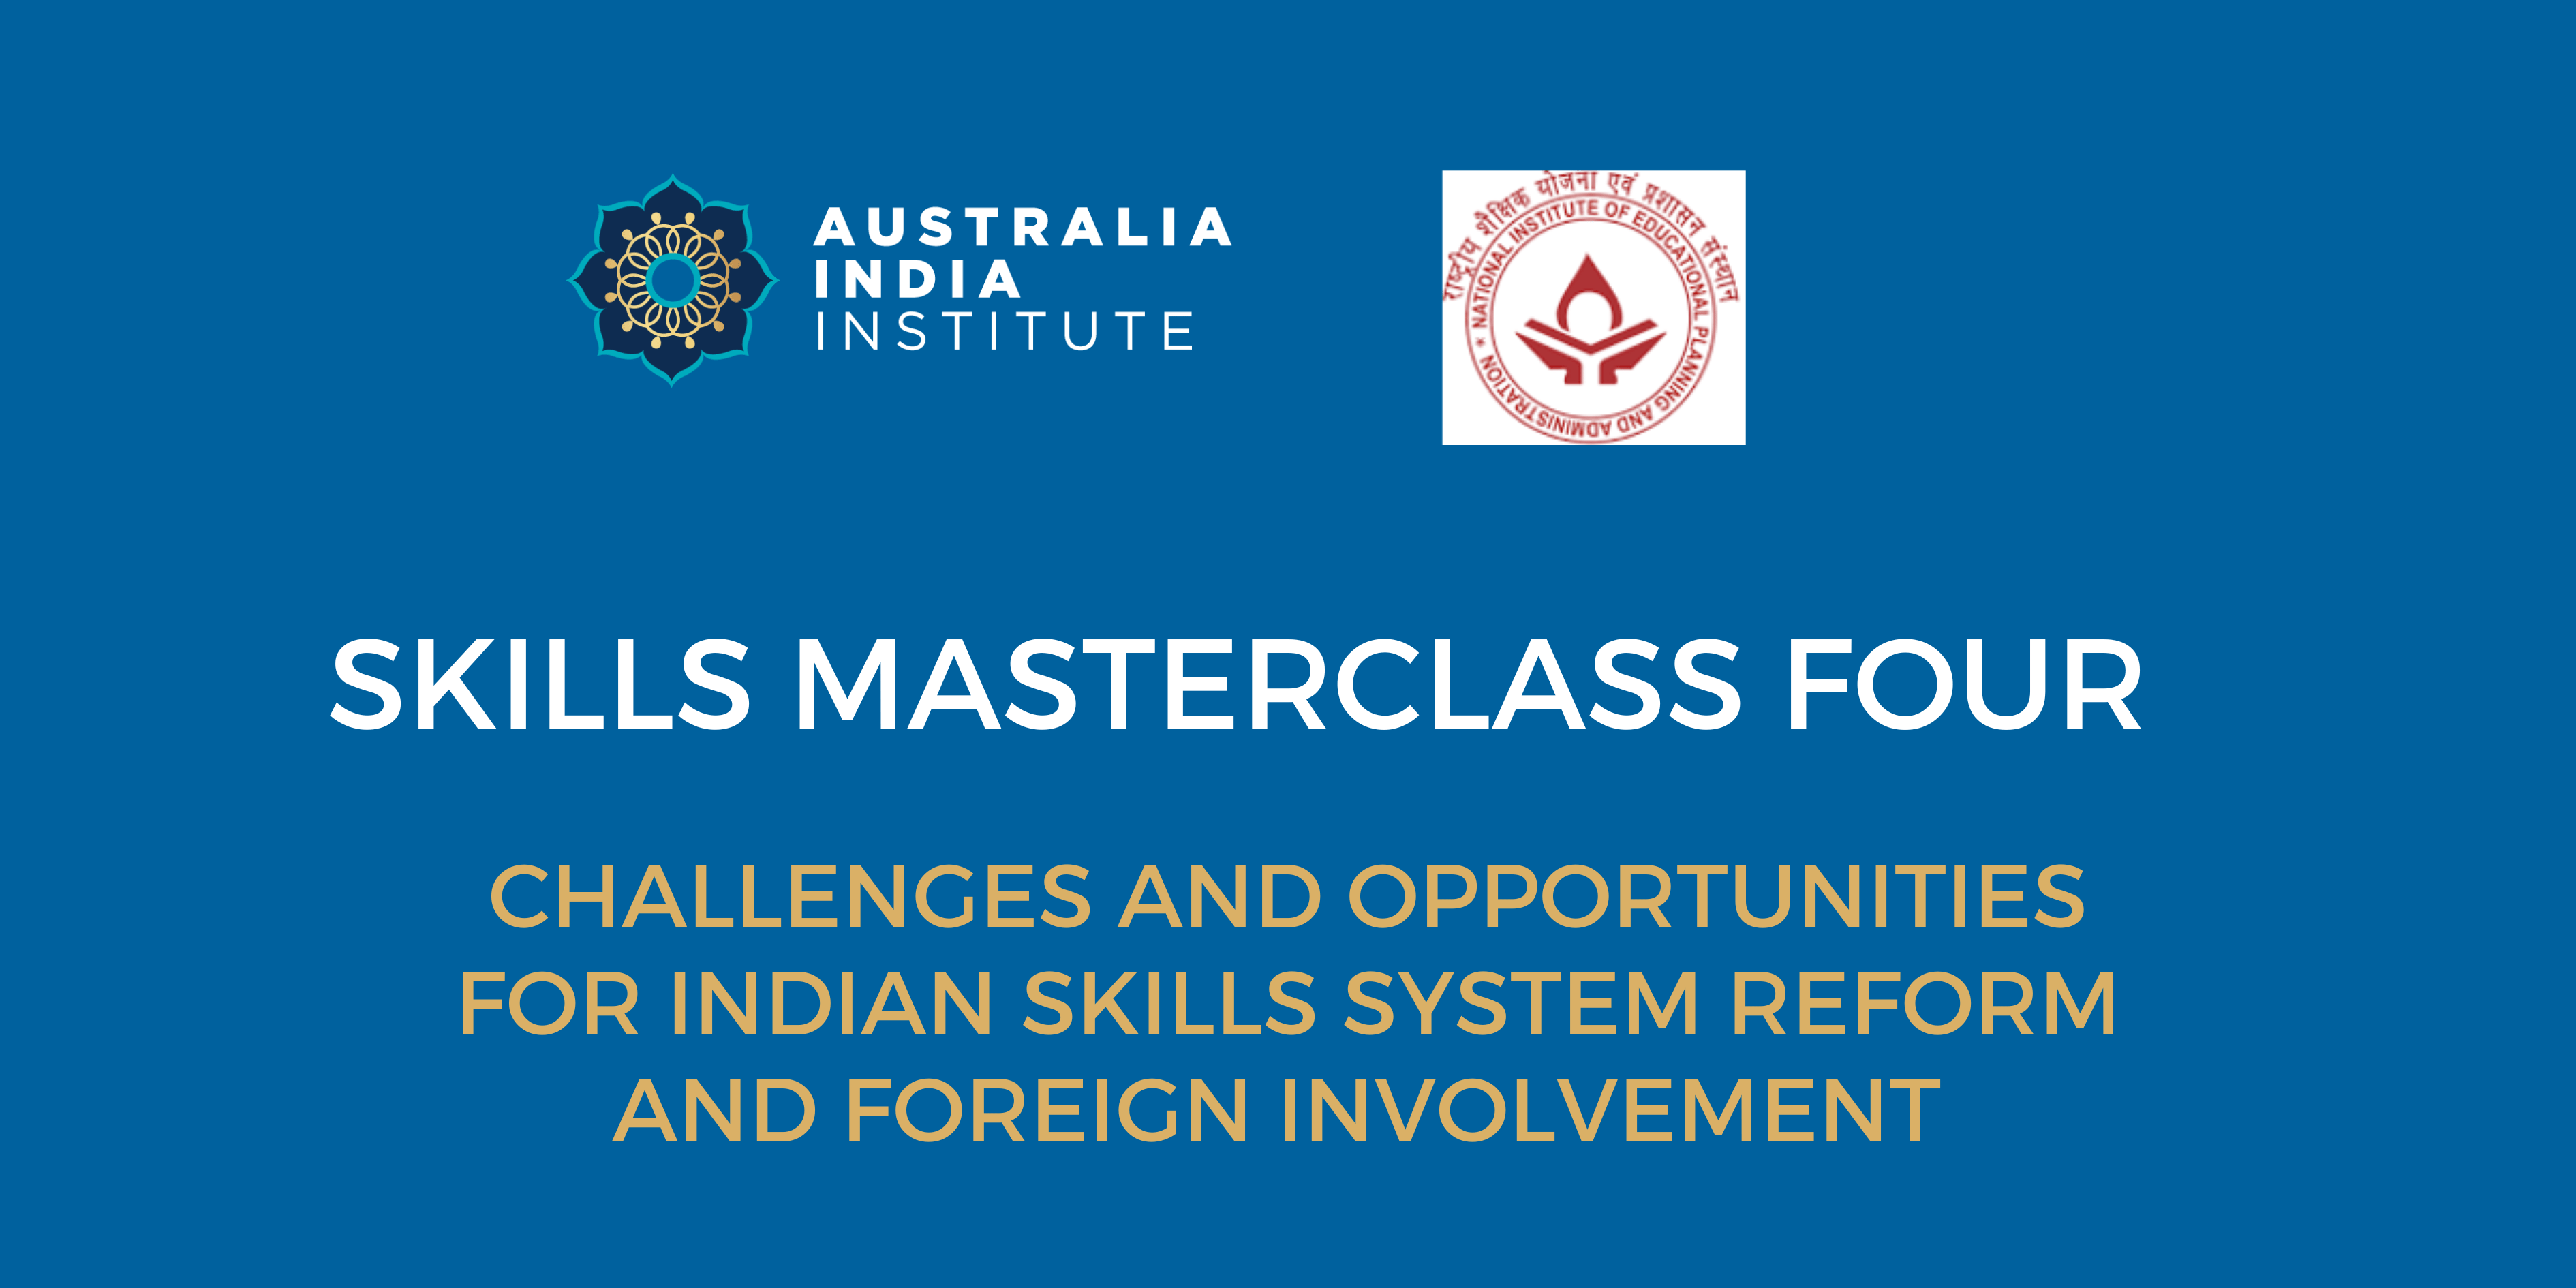 MASTERCLASS FOUR: Challenges and opportunities for Indian skills system reform and foreign involvement